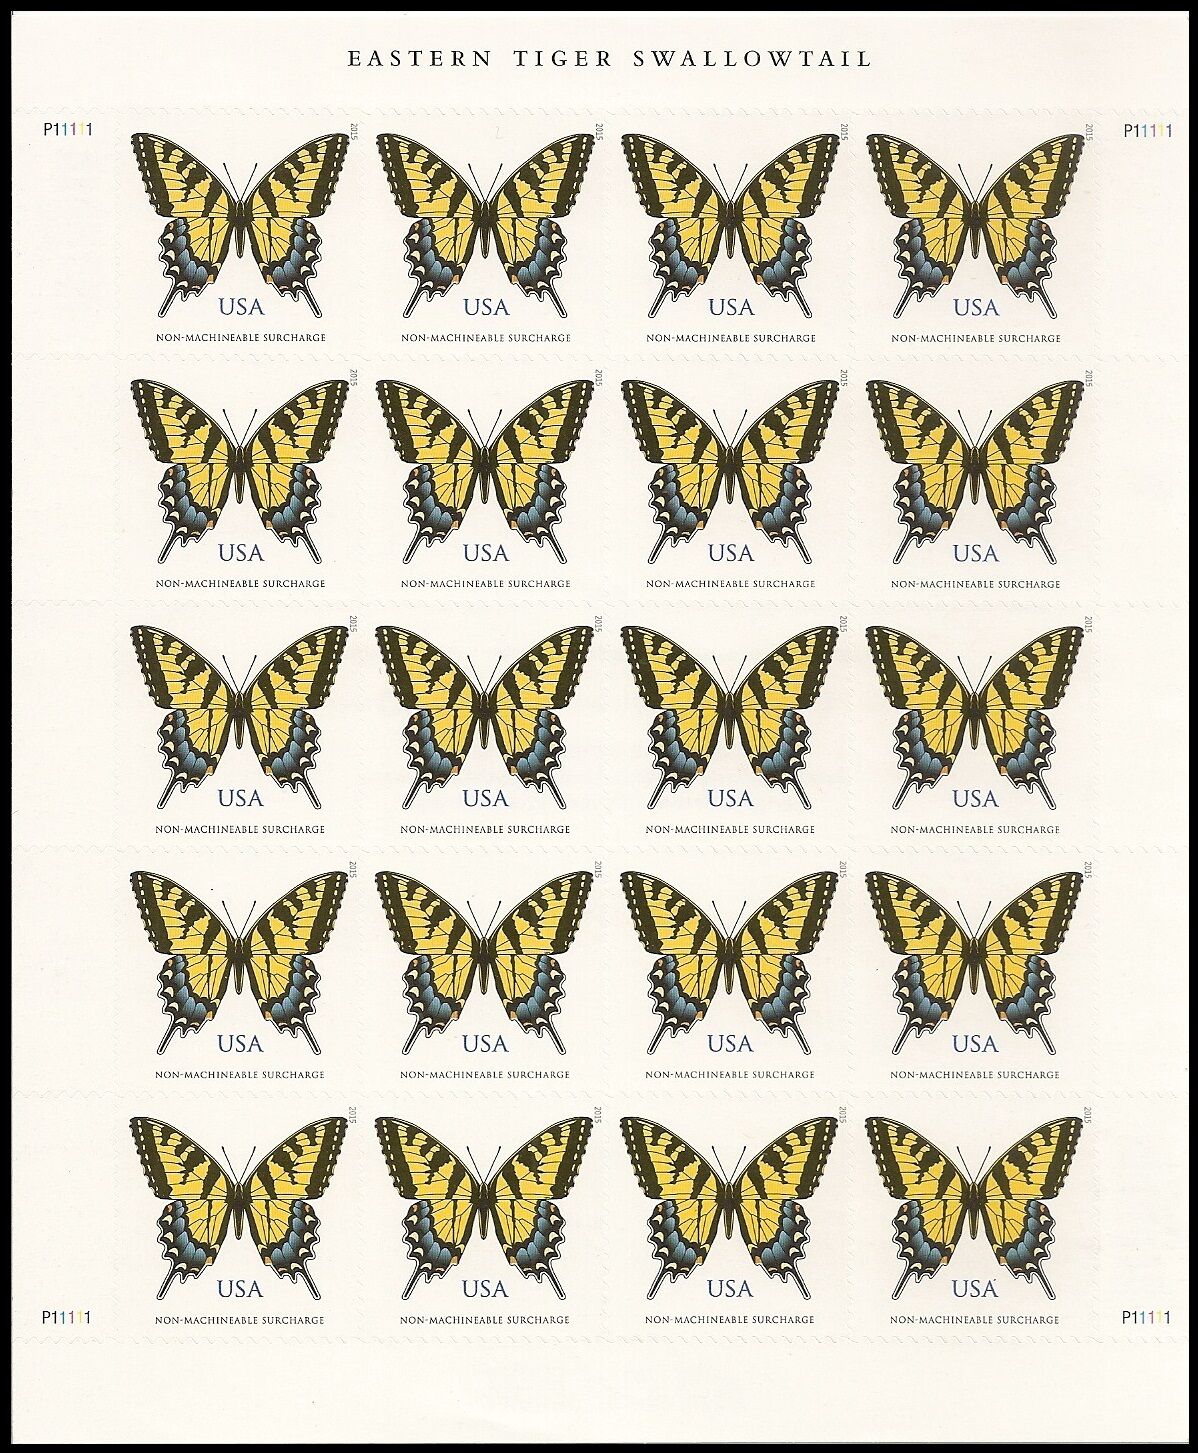 US 4999 Eastern Tiger Swallowtail Butterfly NMS sheet (20 stamps